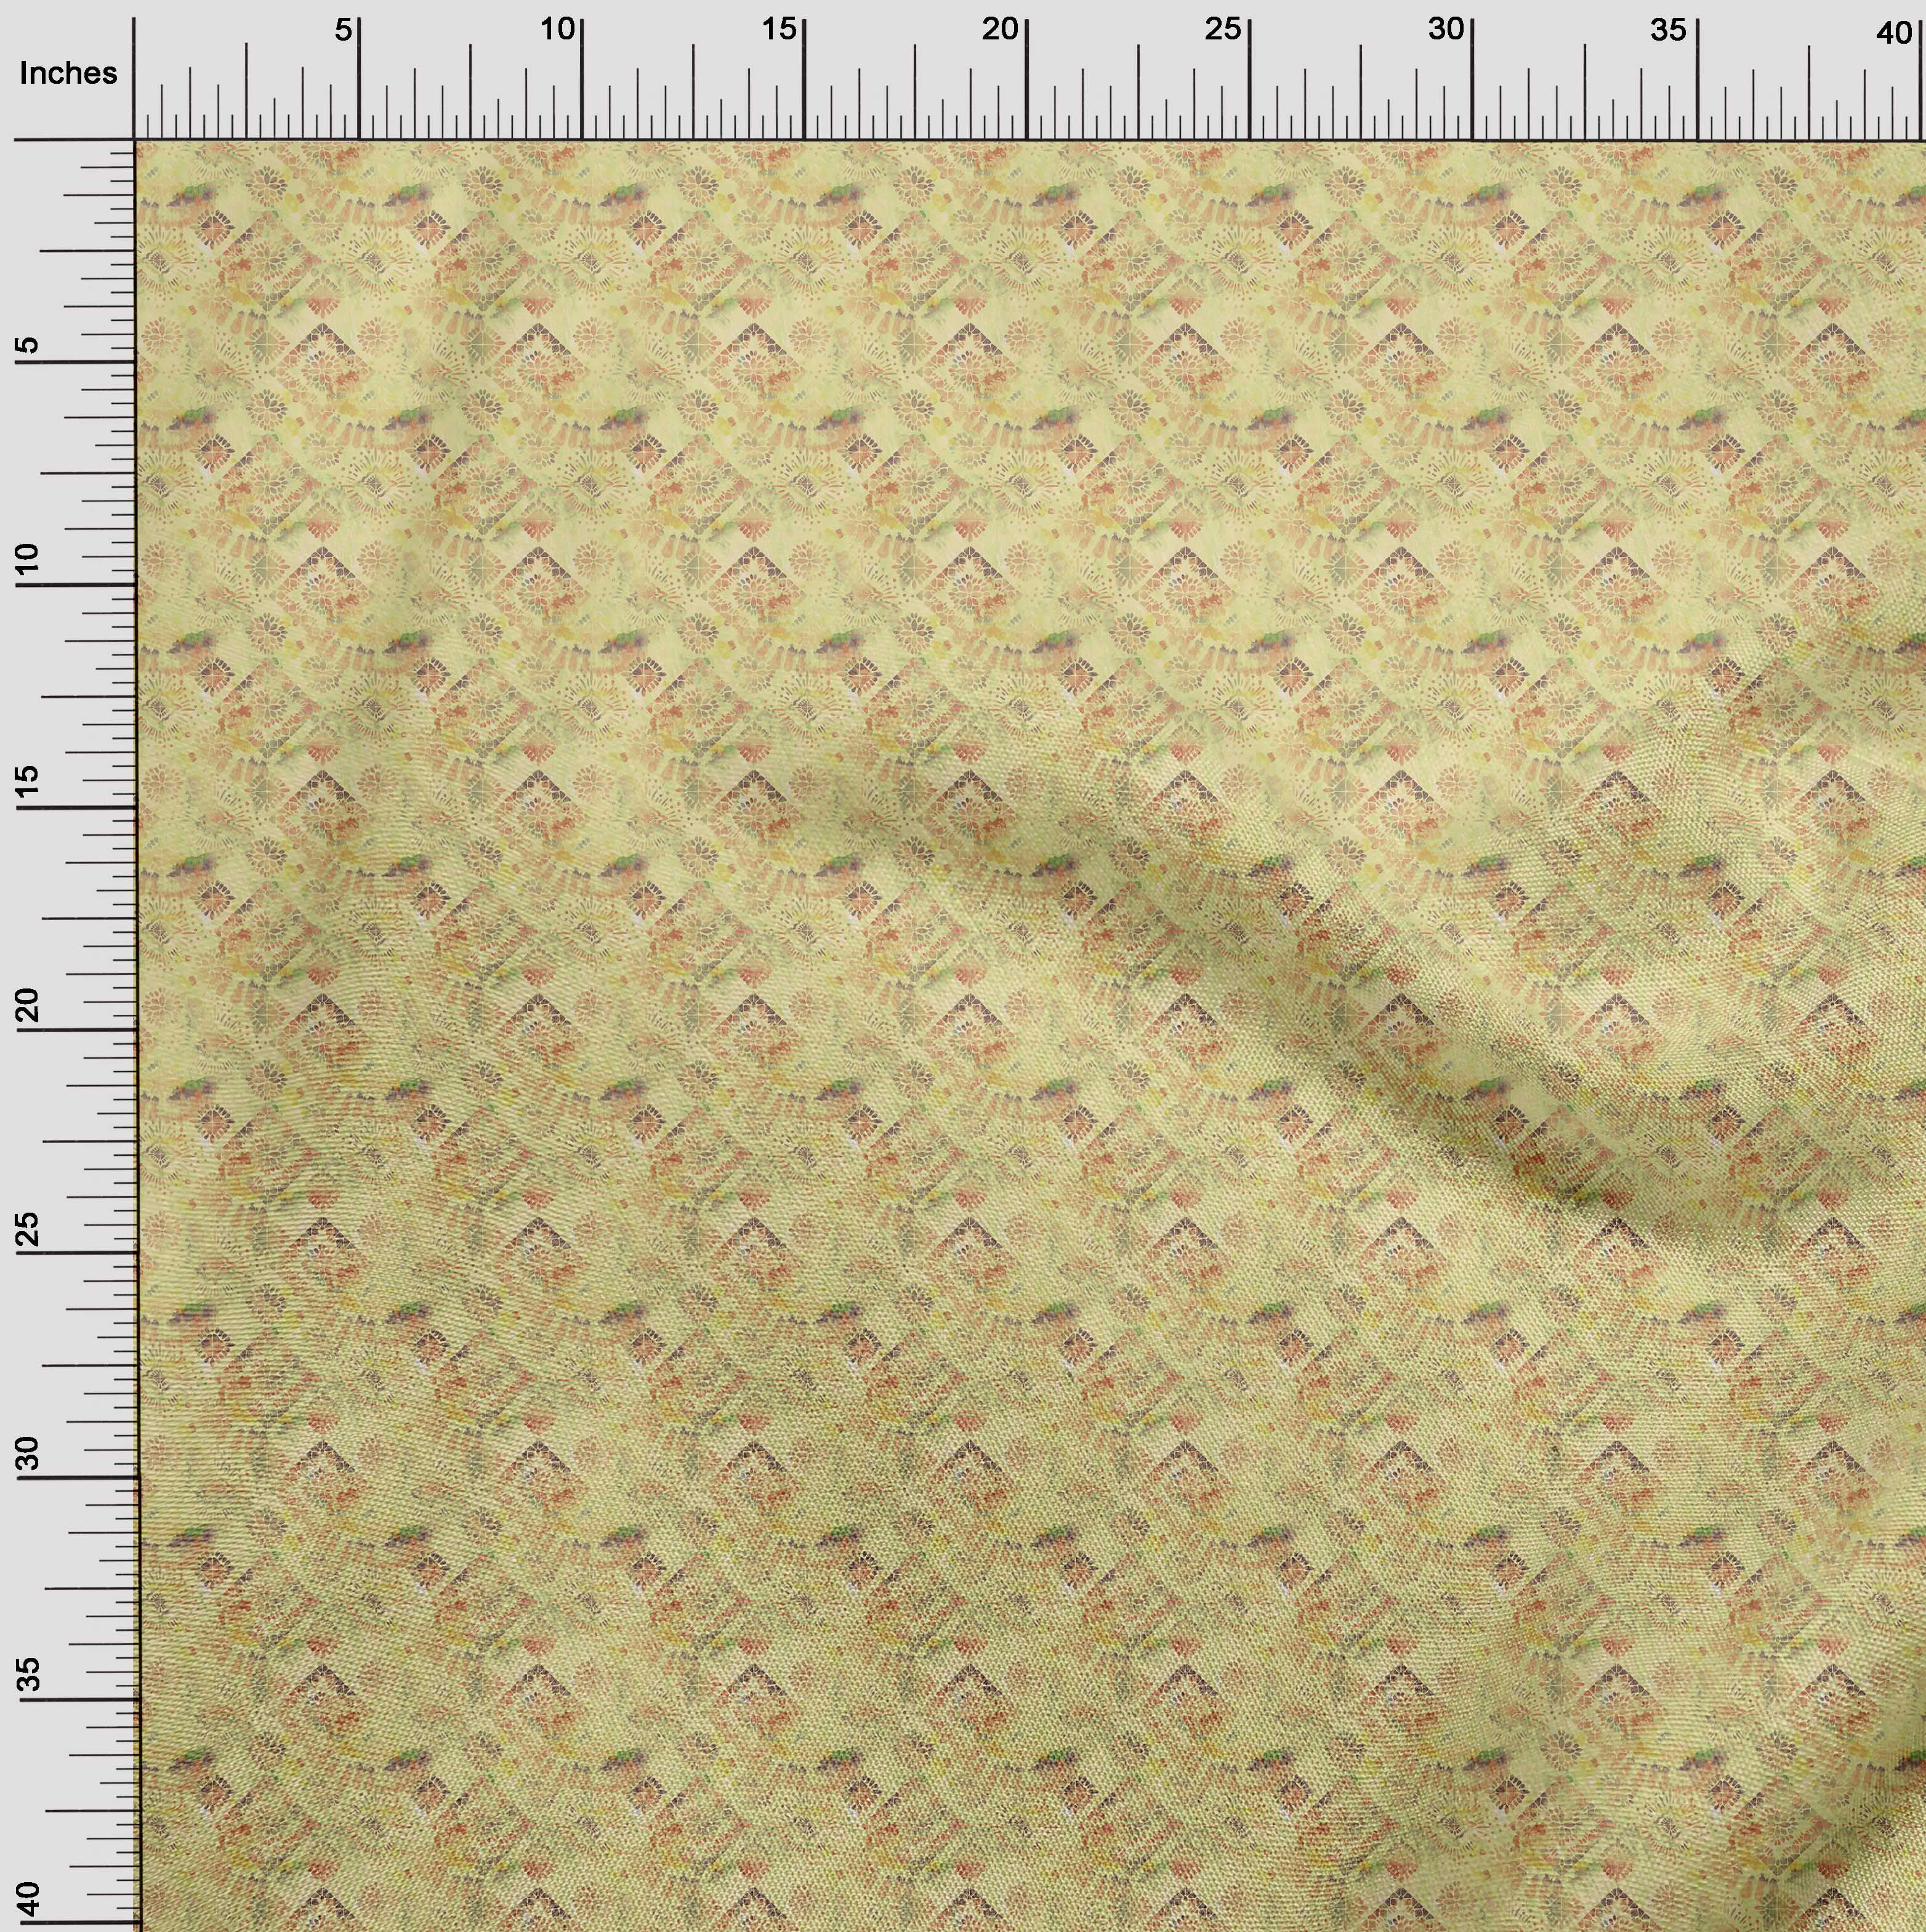 oneOone Cotton Jersey Light Yellow Fabric Asian Tie & Dye With Geometric  Diy Clothing Quilting Fabric Print Fabric By Yard 58 Inch Wide 